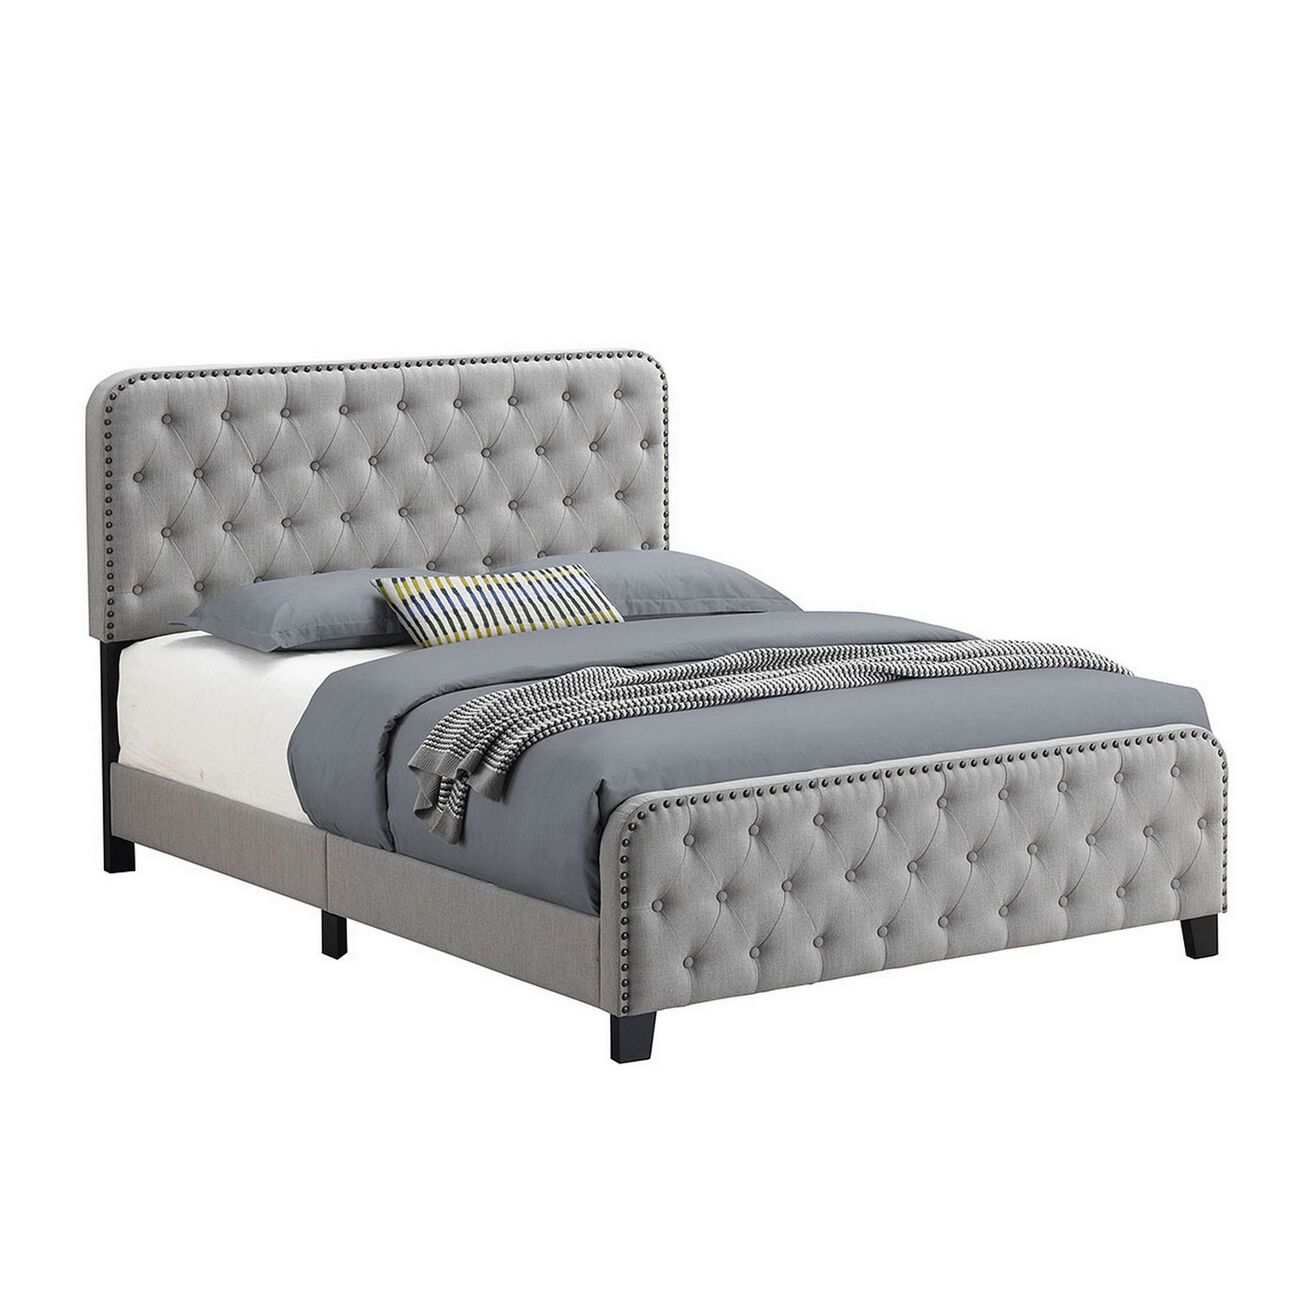 Fabric Upholstered Tufted Full Bed with Nailhead Trim, Gray